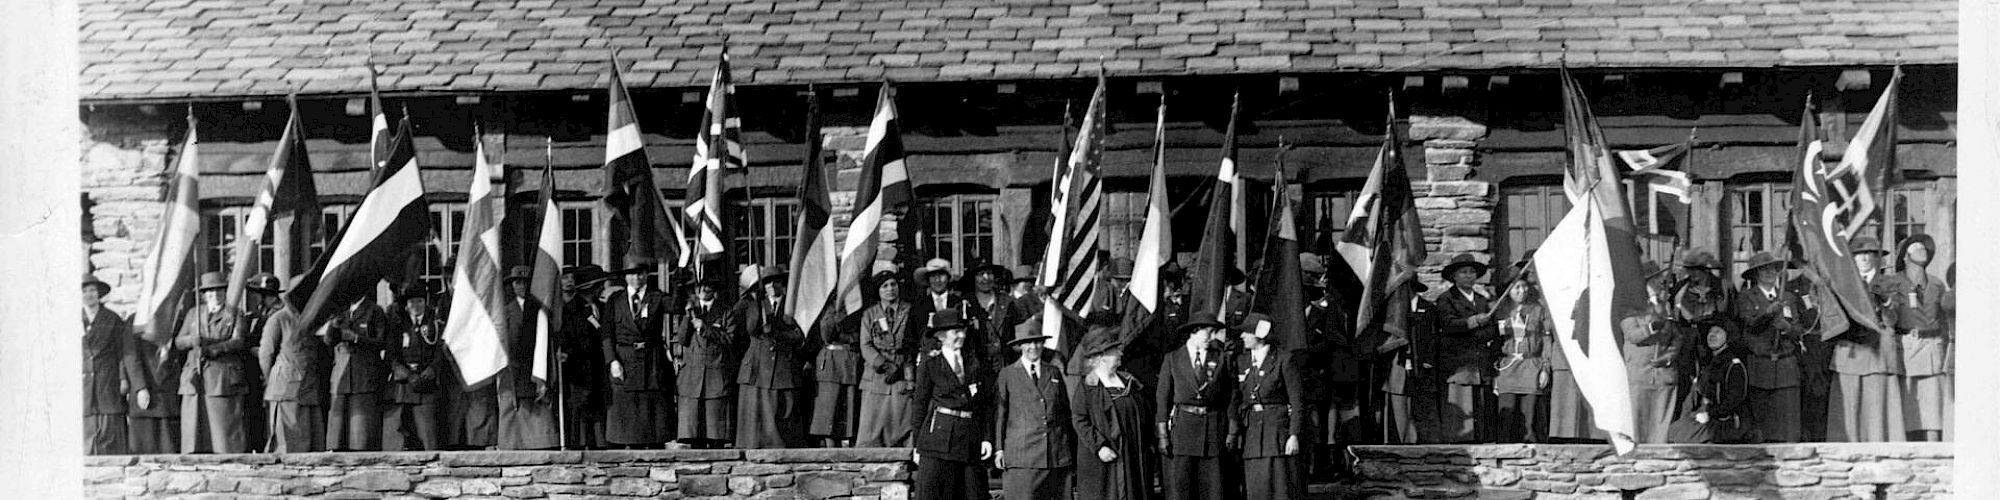 Black and white photo of people in uniforms holding flags in front of a rustic building.